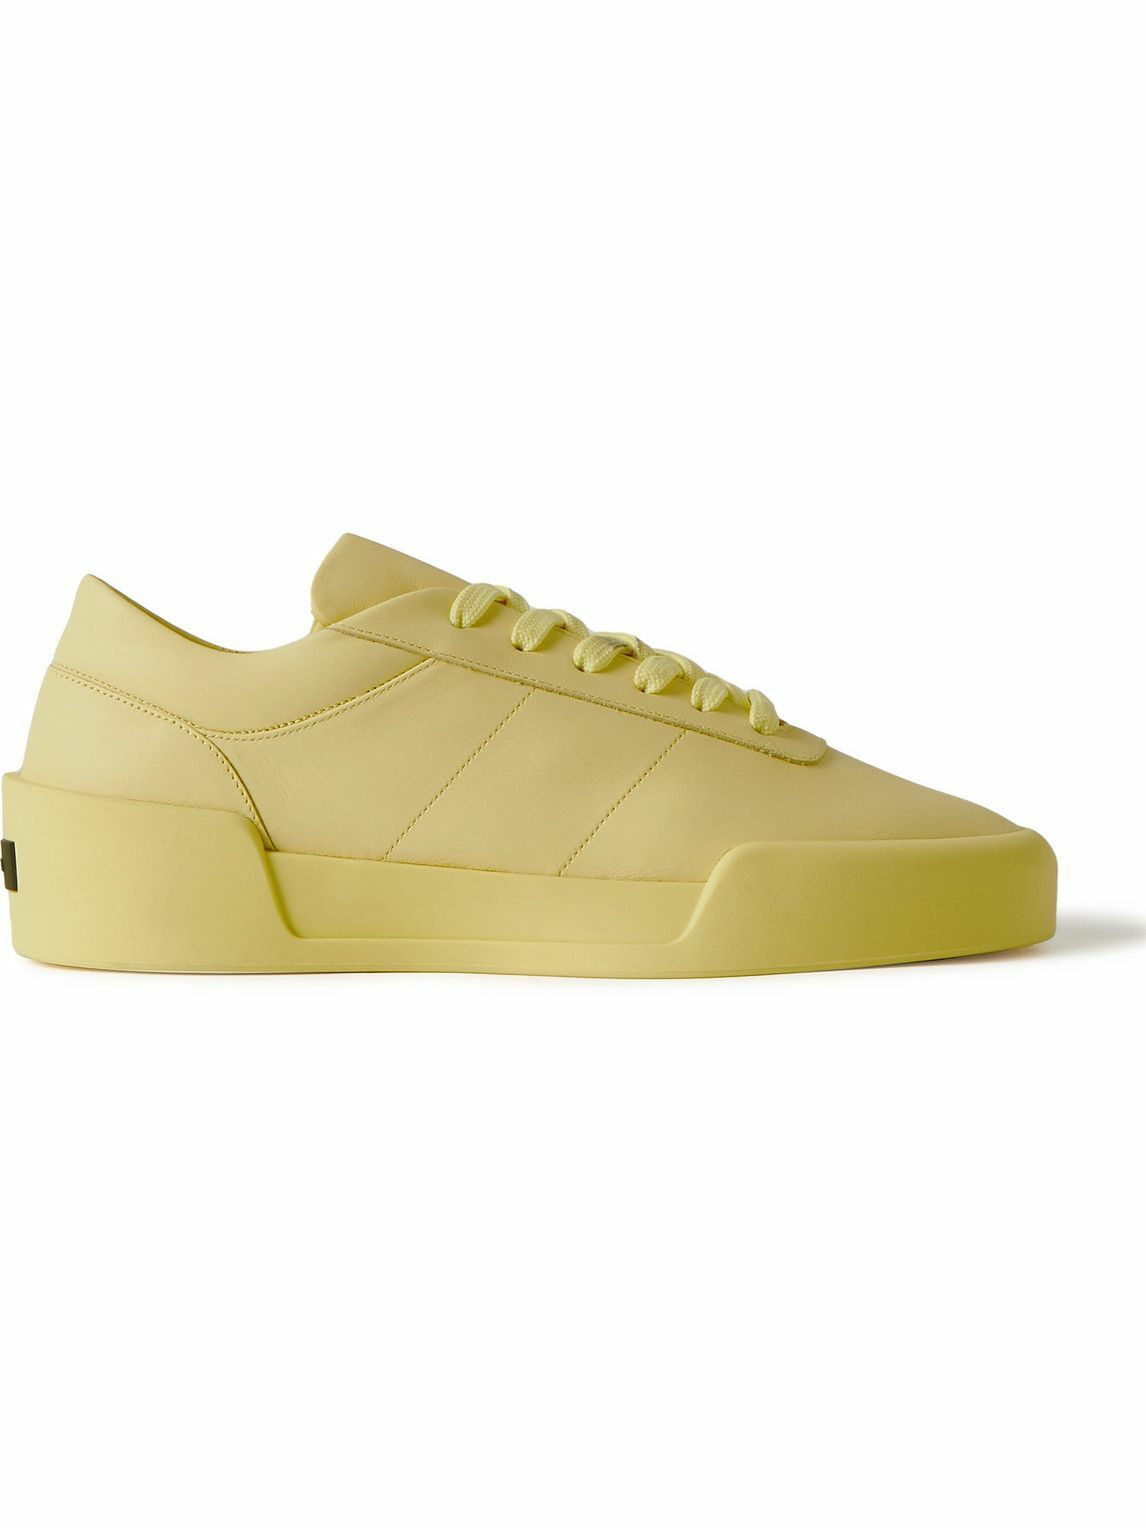 Photo: Fear of God - Aerobic Low Leather Sneakers - Yellow